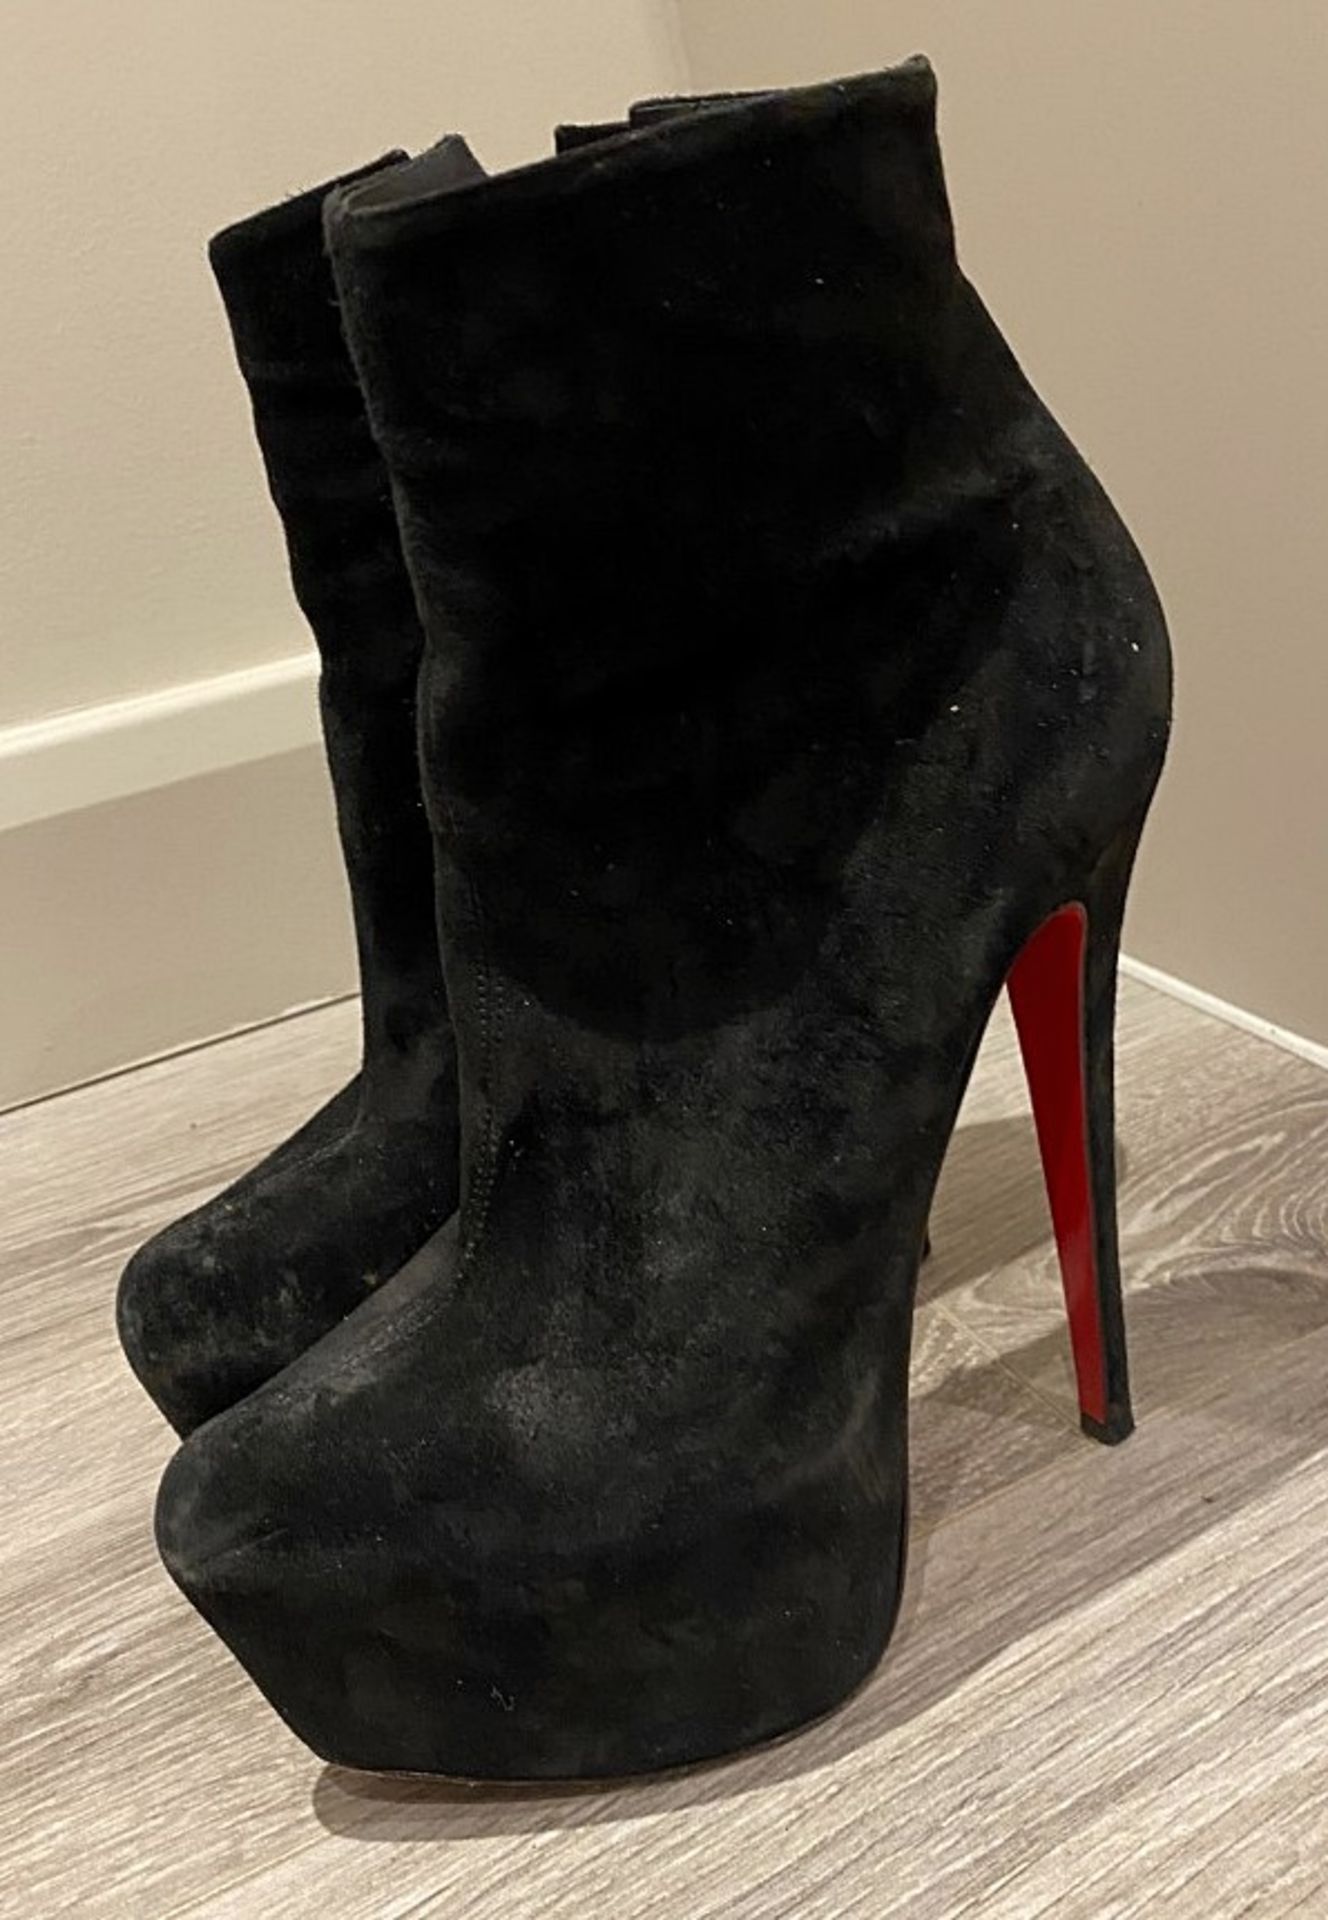 1 x Pair Of Genuine Christain Louboutin Boots In Black - Size: 36.5 - Preowned in Good Condition - R